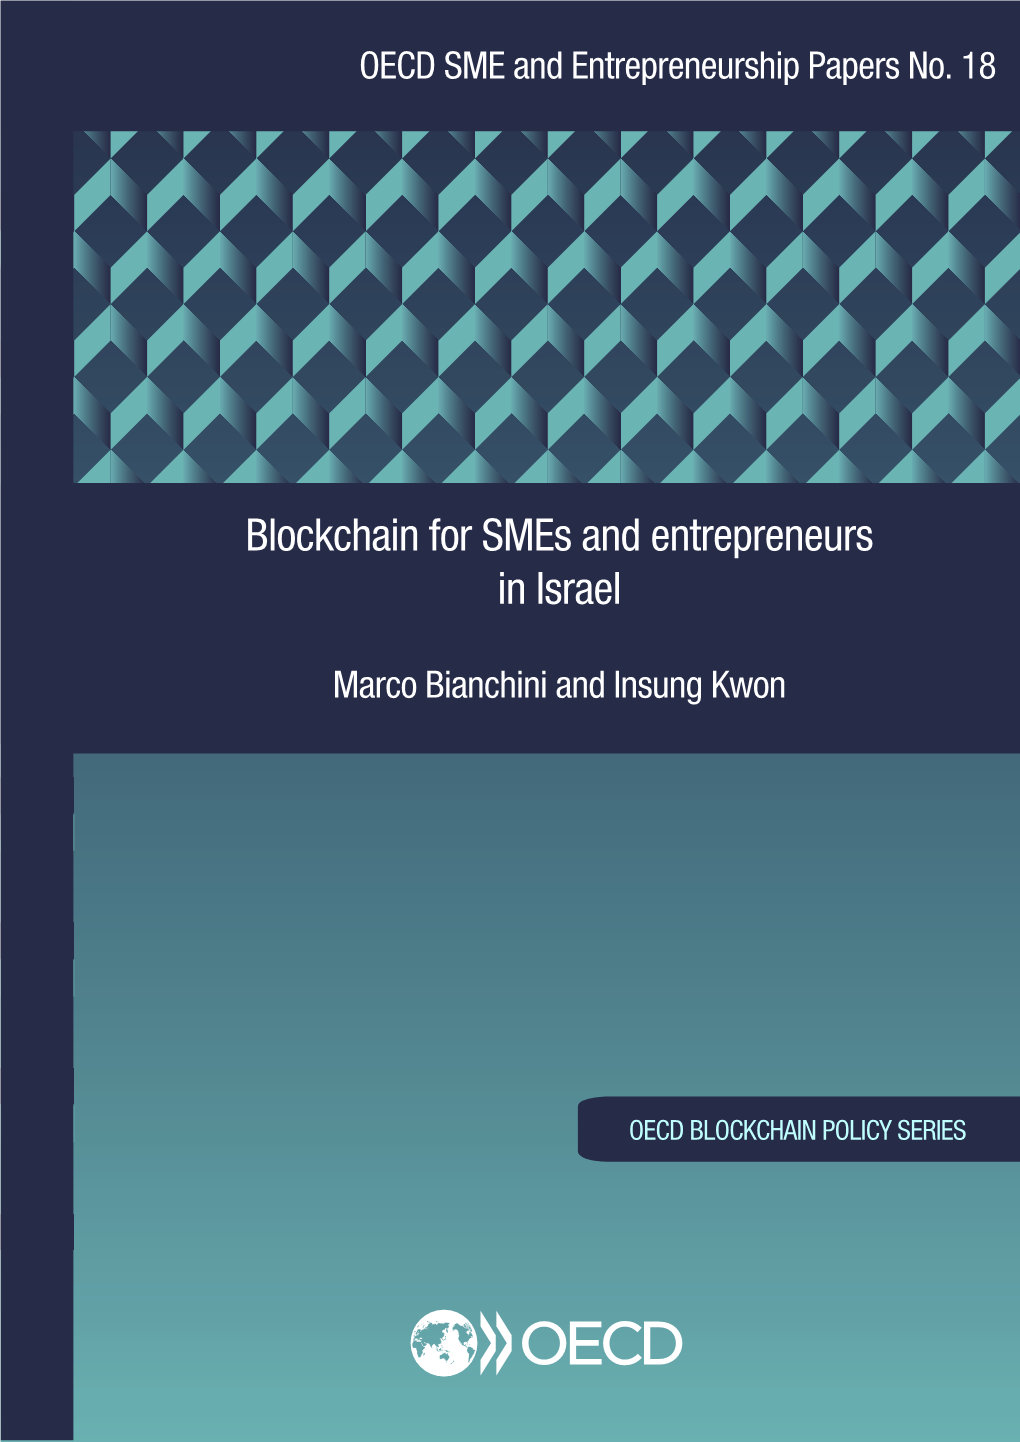 Blockchain for Smes and Entrepreneurs in Israel OECD Blockchainmarco Bianchini and Insung Kwon OECDPOLICYBLOCKCHAIN POLICY FORUM FORUM